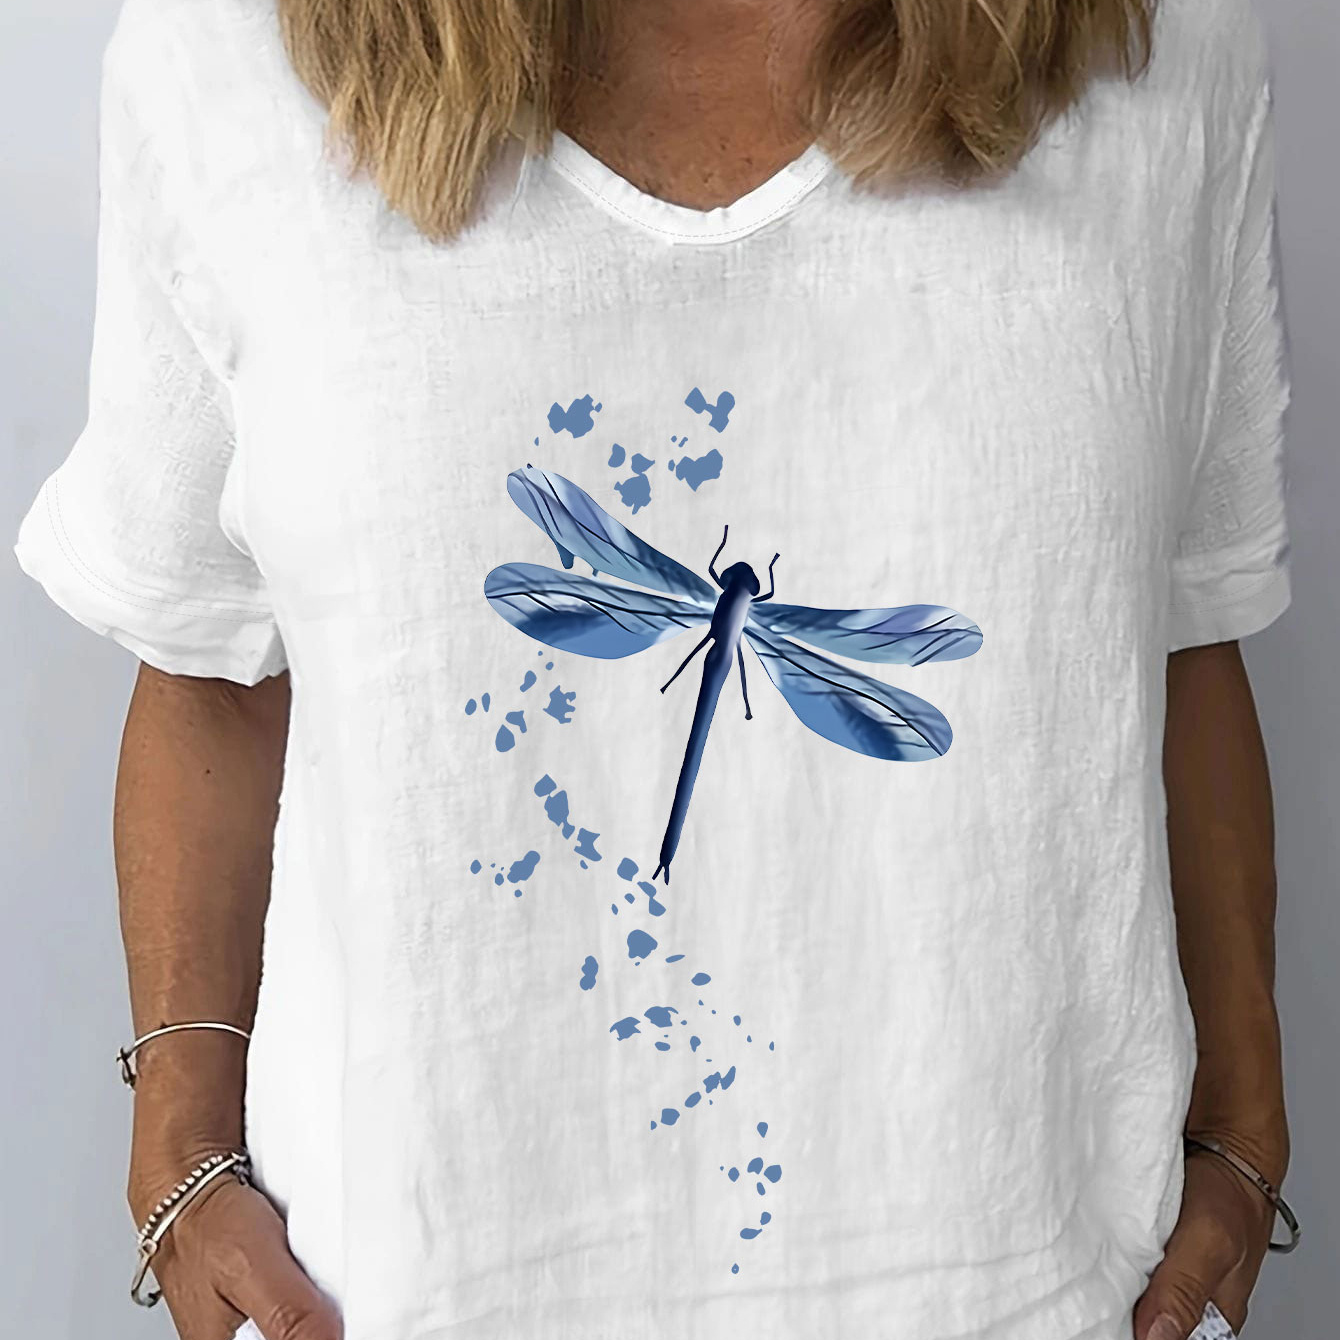 

Dragonfly Print T-shirt, Short Sleeve V Neck Casual Top For Summer & Spring, Women's Clothing